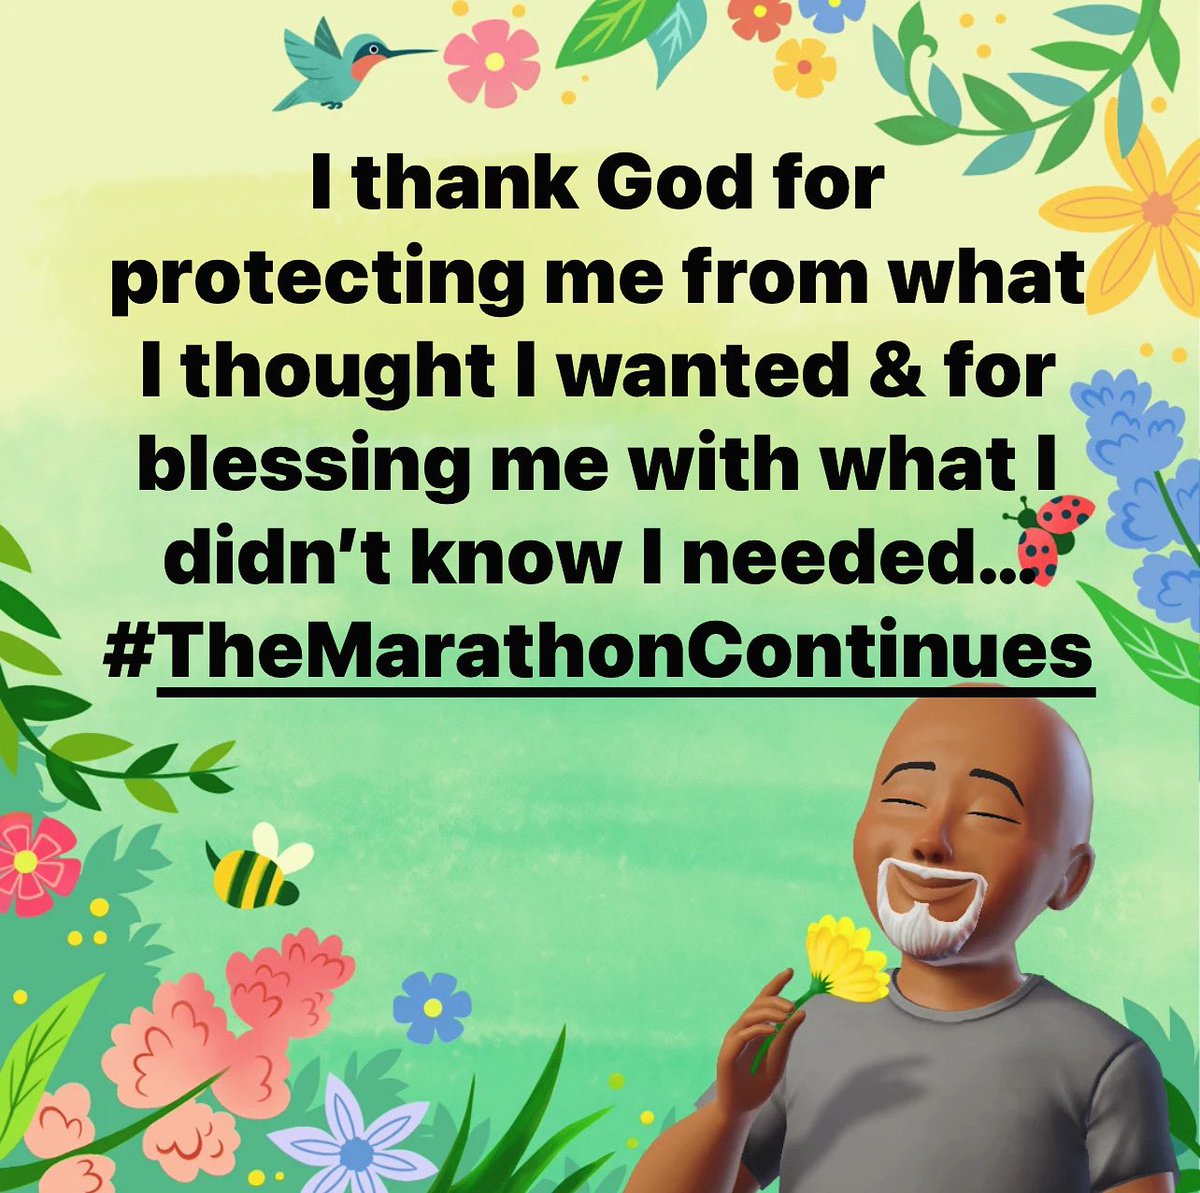 I thank God for protecting me from what I thought I wanted & for blessing me with what I didn’t know I needed… 
🦋🔥💪🏾🌱 
#KeepStackingSmallWins #FightForYourDreams #GodsPlan 🌺🌸🌼🌻#YouAreDestinedForMore #WorkInProgress #EmbraceTheJourney #OwnYourLife #TheMarathonContinues